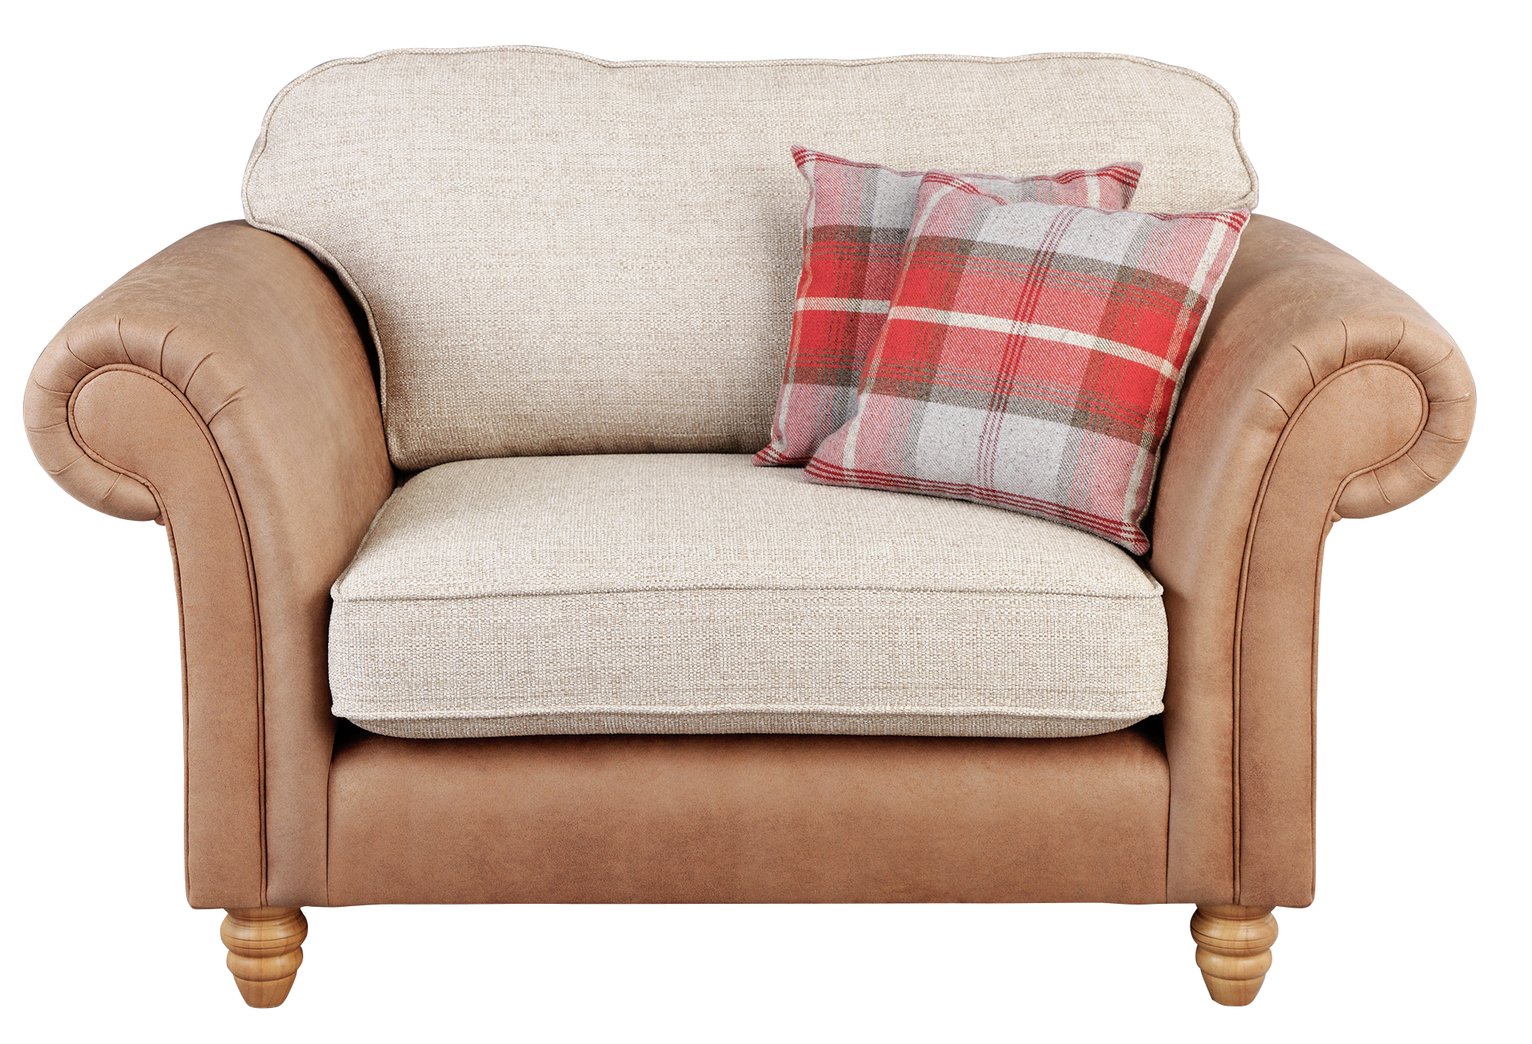 Save 15% when you spend over £150 on selected sofas | Argos Price